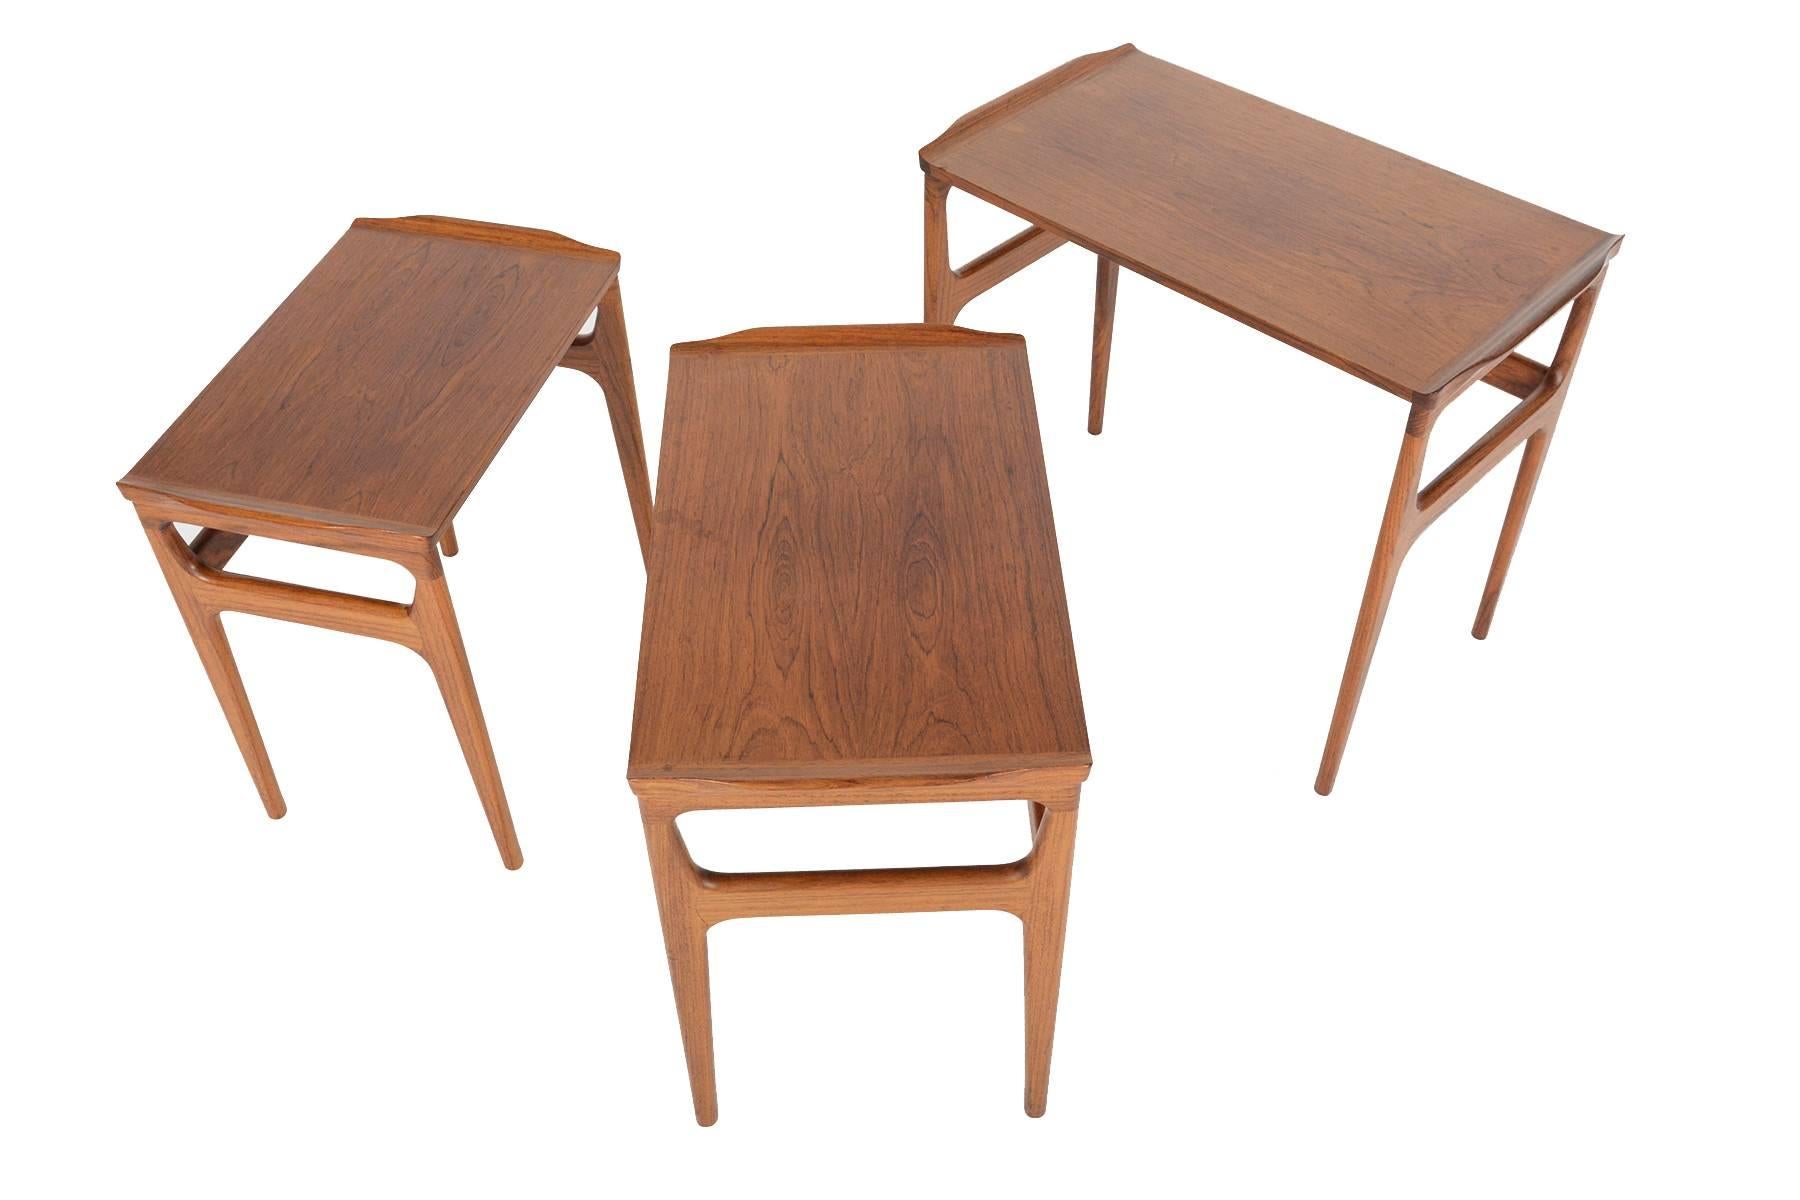 20th Century Danish Modern Rosewood Nesting Tables by Heltborg